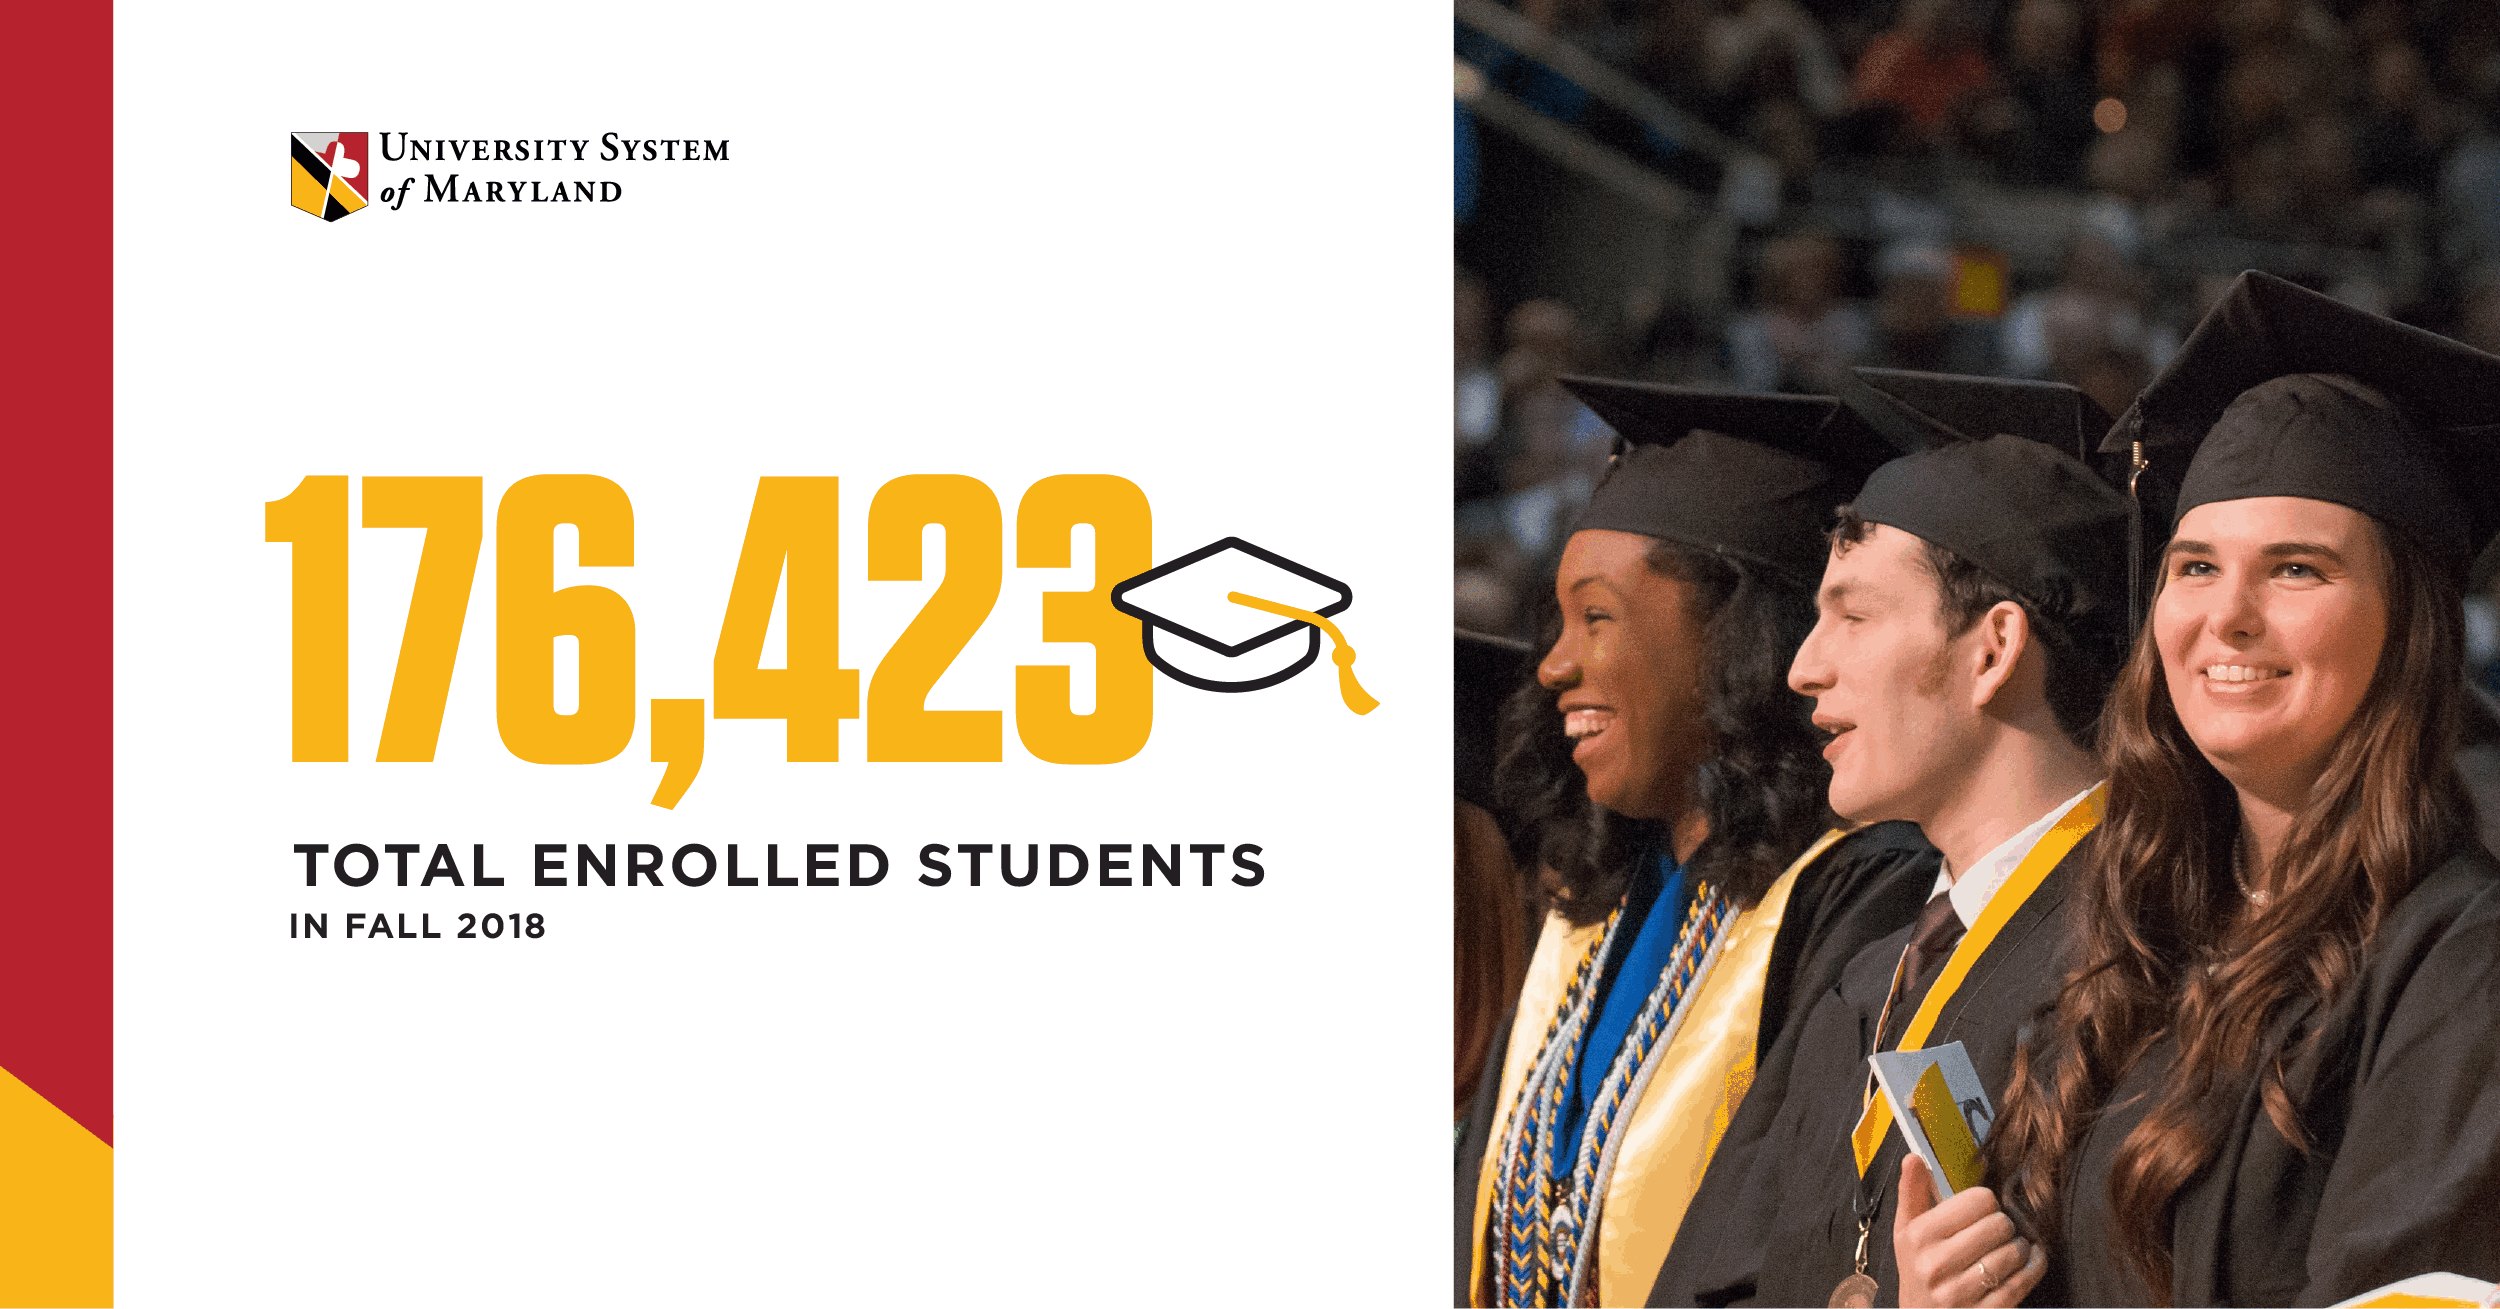 176,423 Total Students Enrolled in Fall 2018